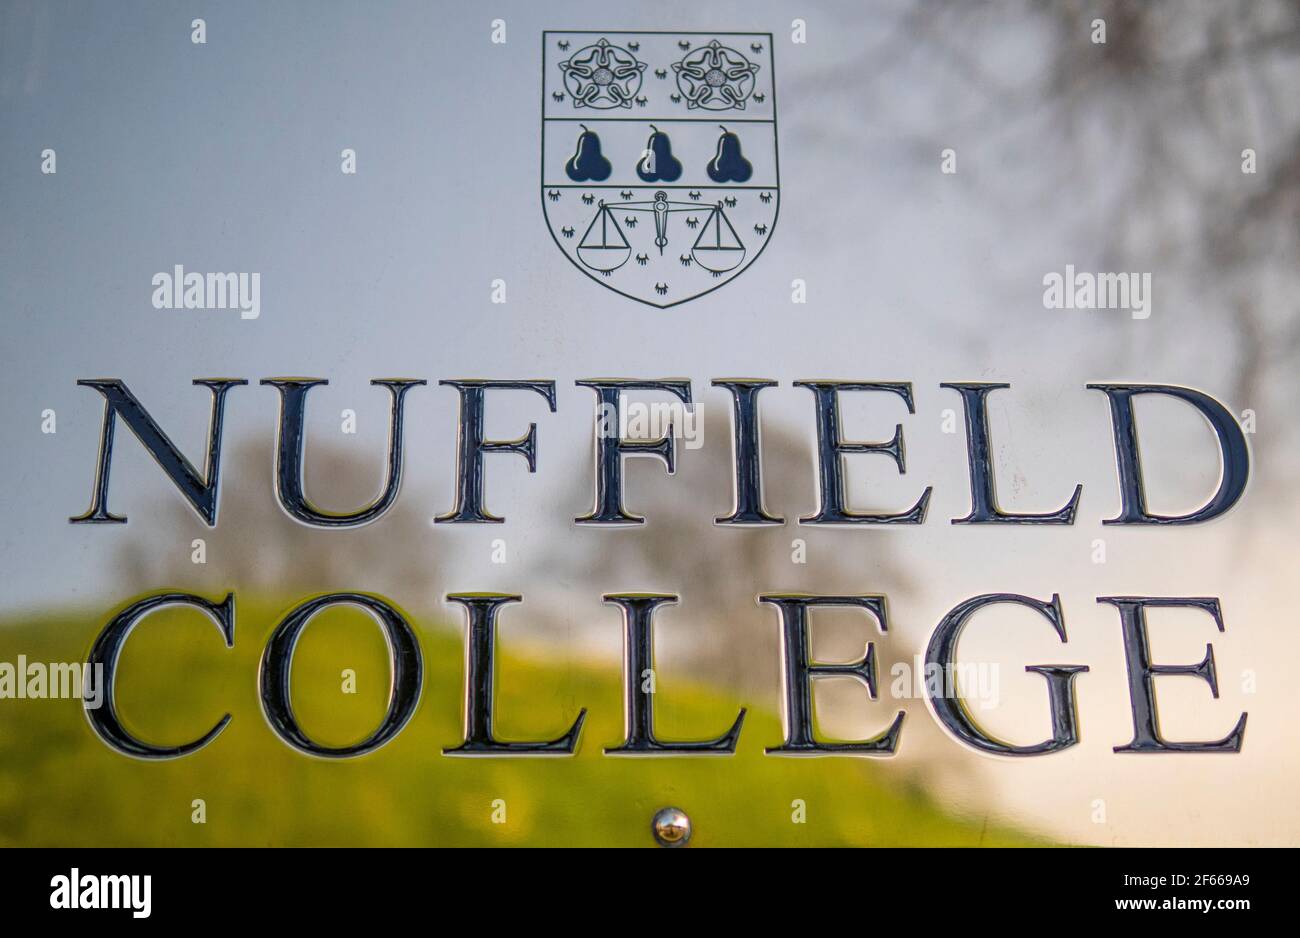 Reflection of Castle Mound, in Nuffield Collage Name Plaque, Oxford University, Oxford, Oxfordshire, England, UK, GB. Stock Photo